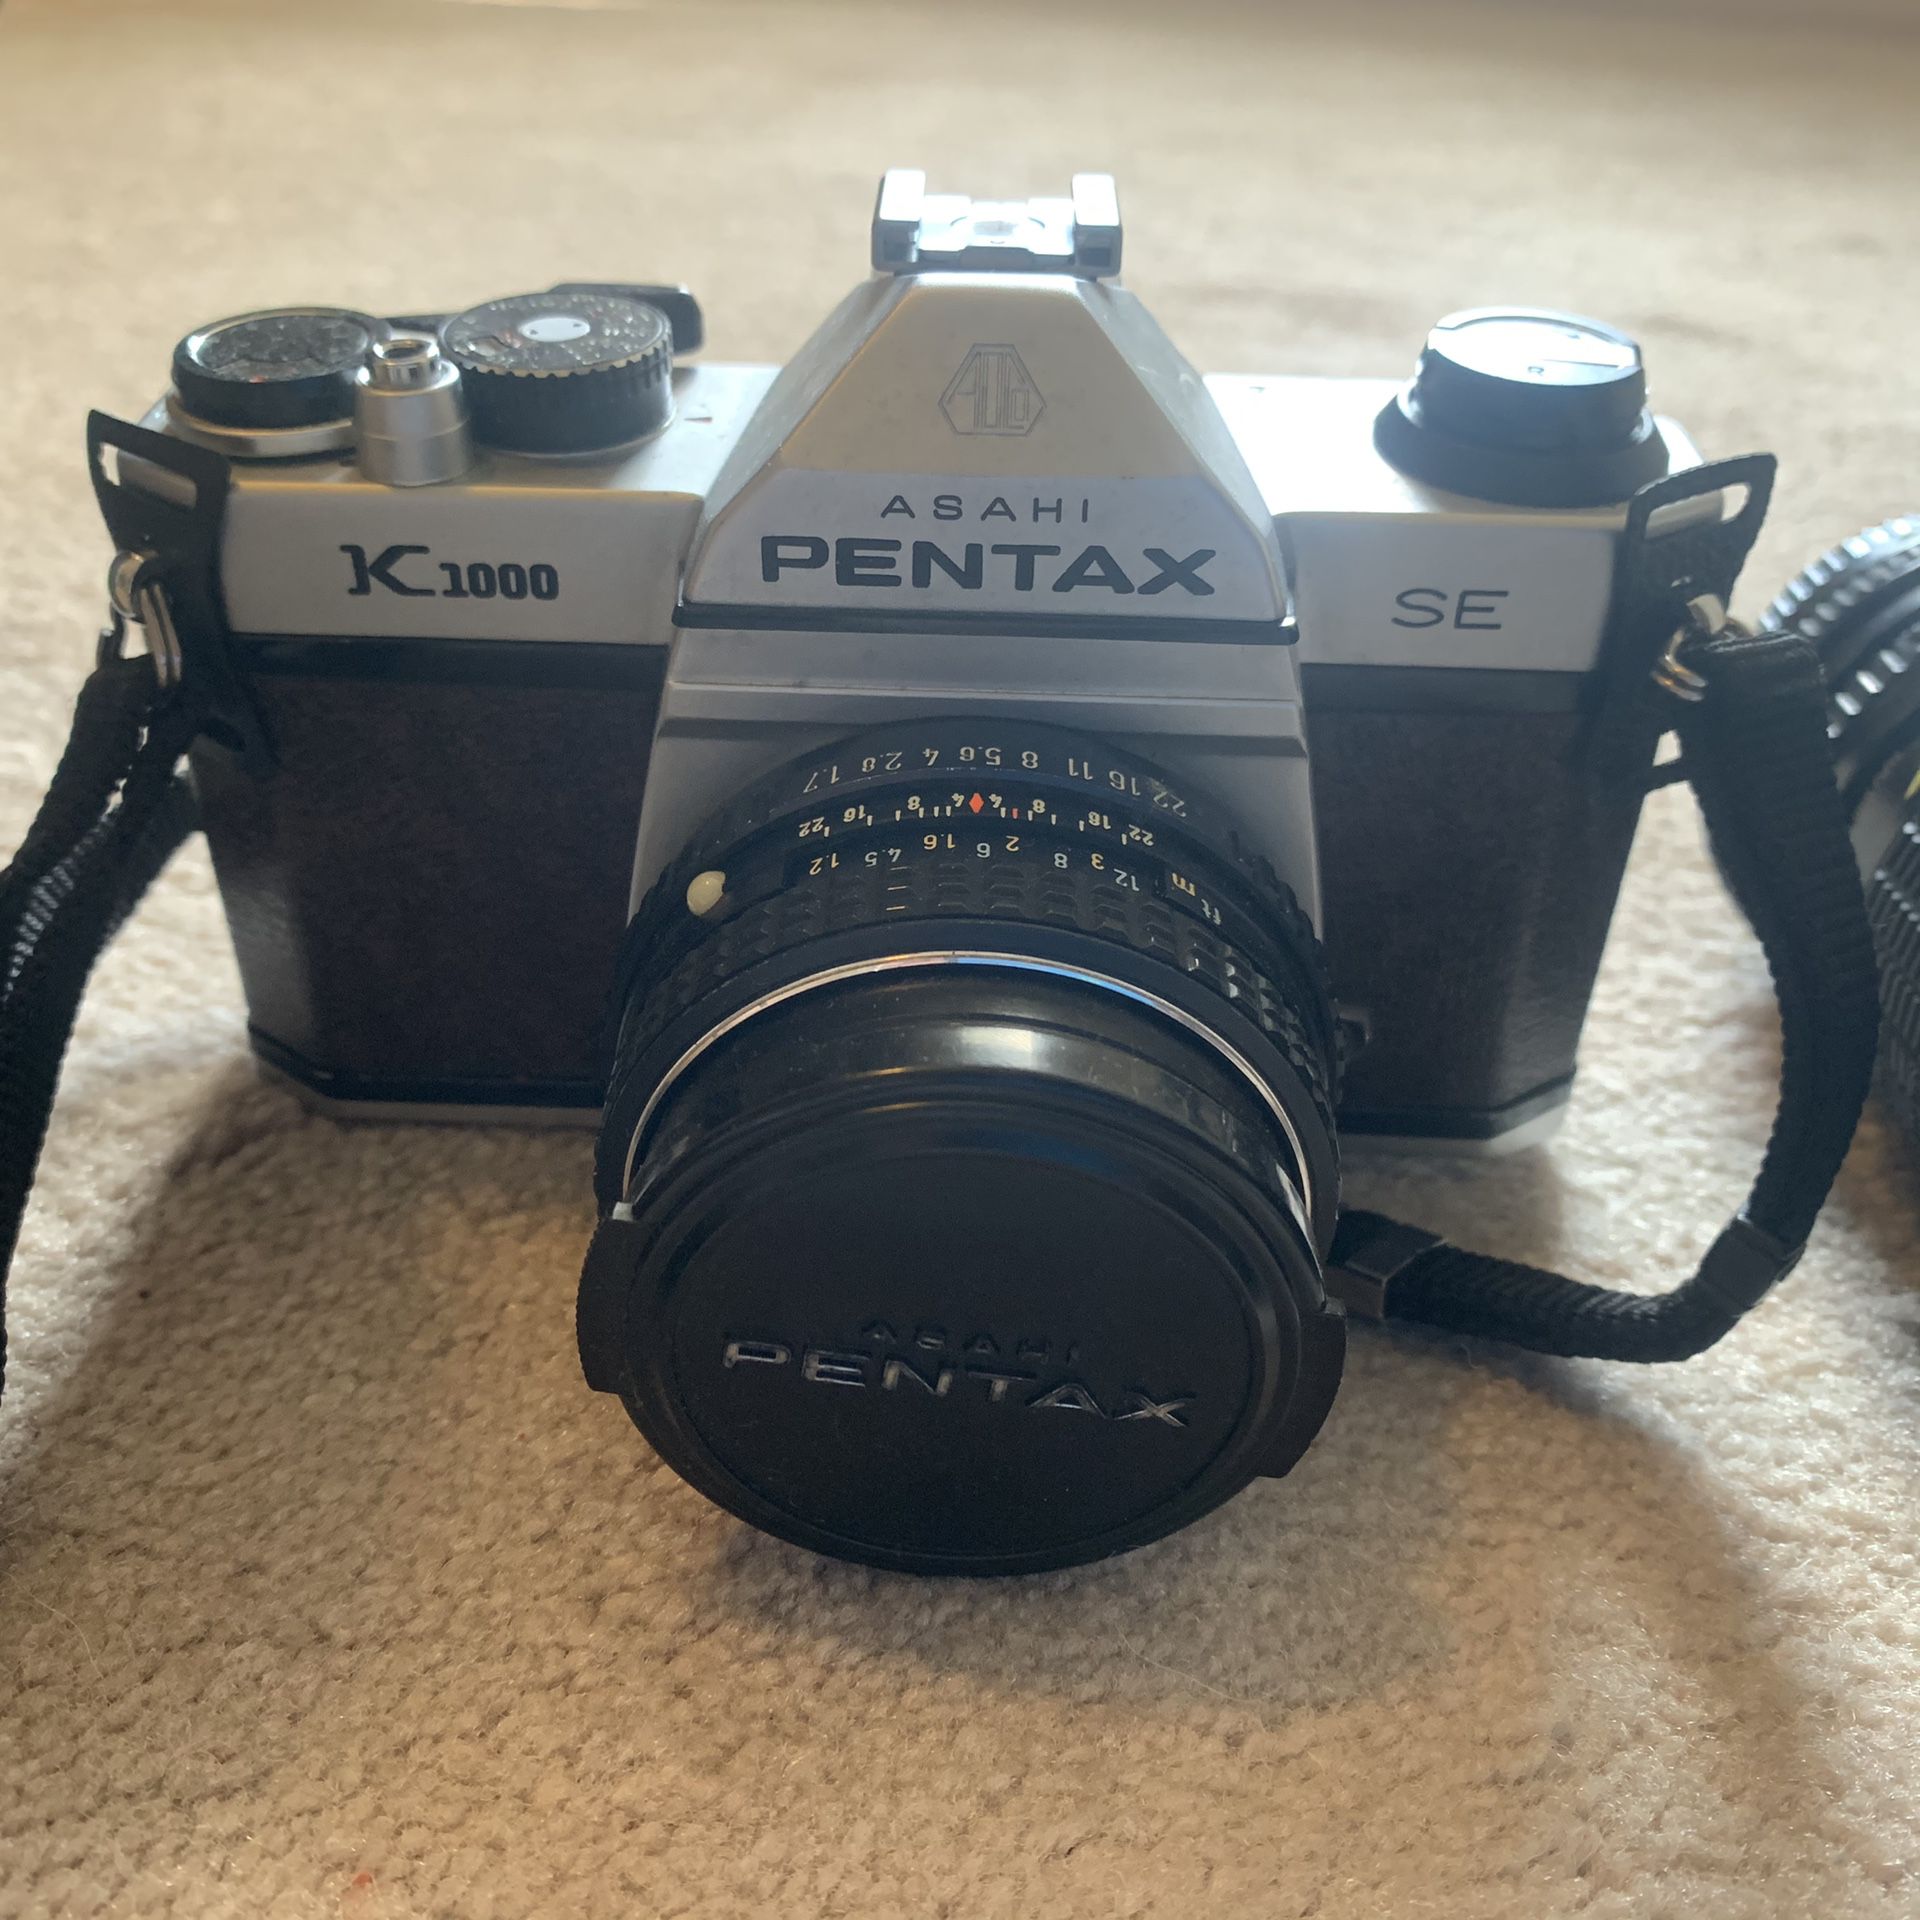 Pentax 35 mm SLR Film Camera with Accessories